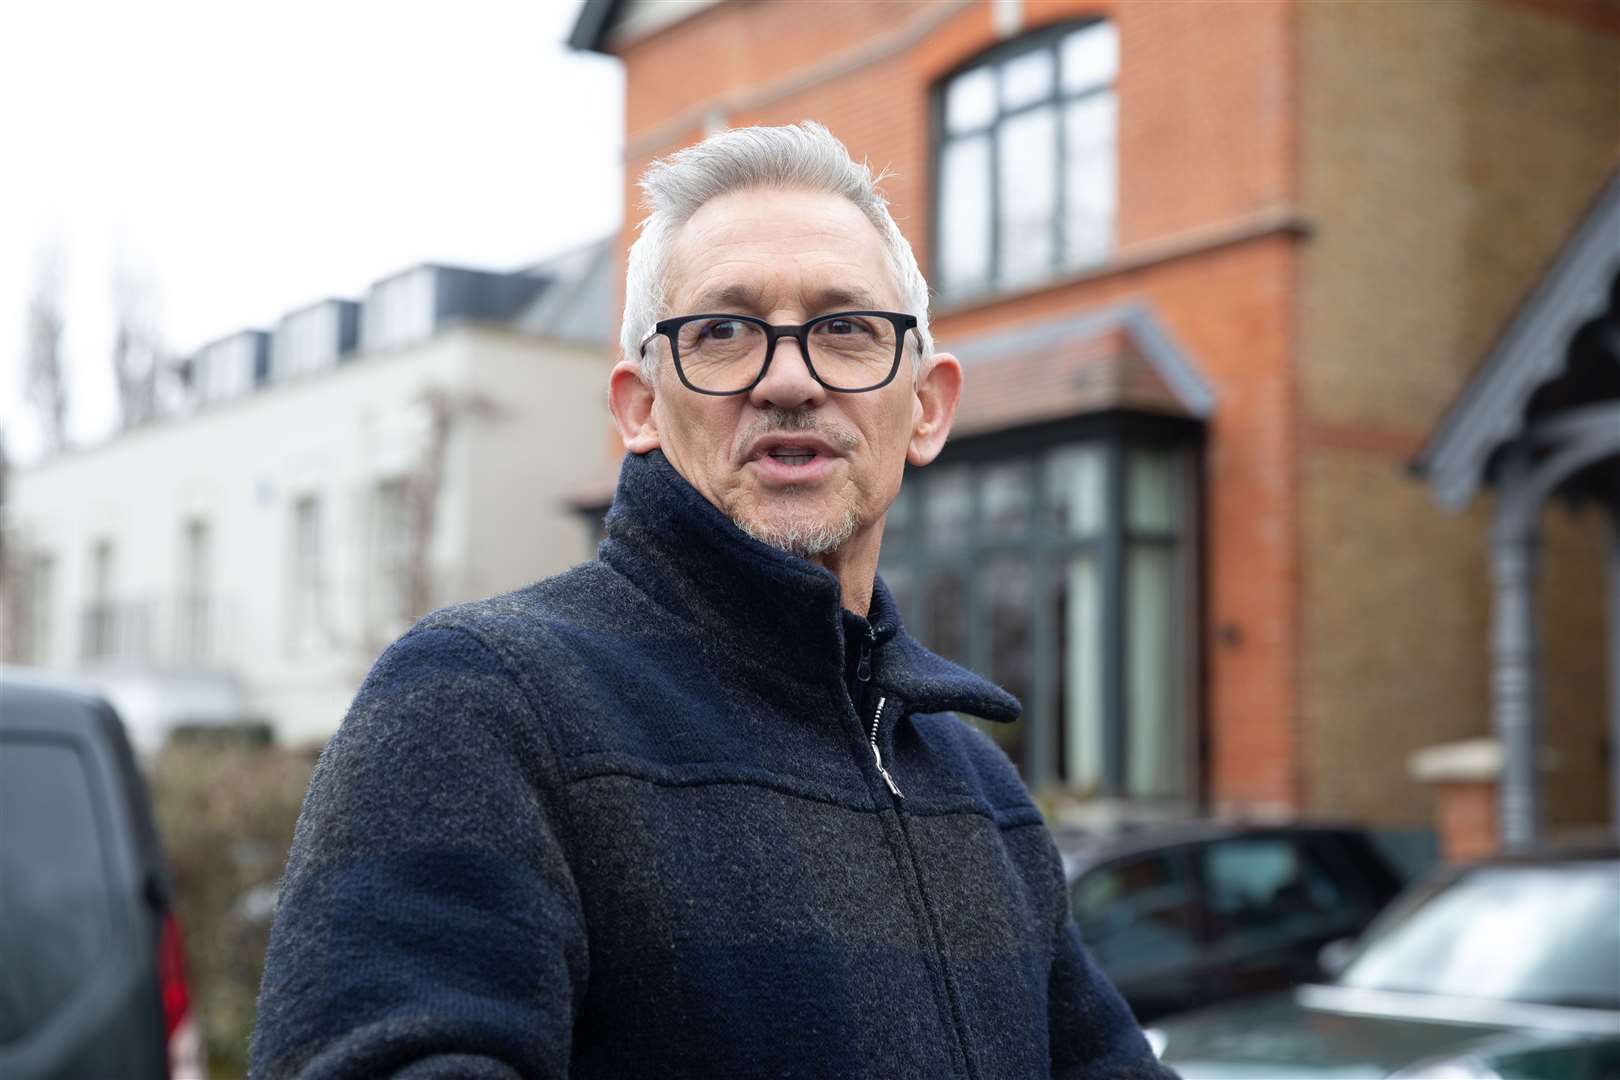 Match Of The Day host Gary Lineker outside his home in London on Sunday (Lucy North/PA)